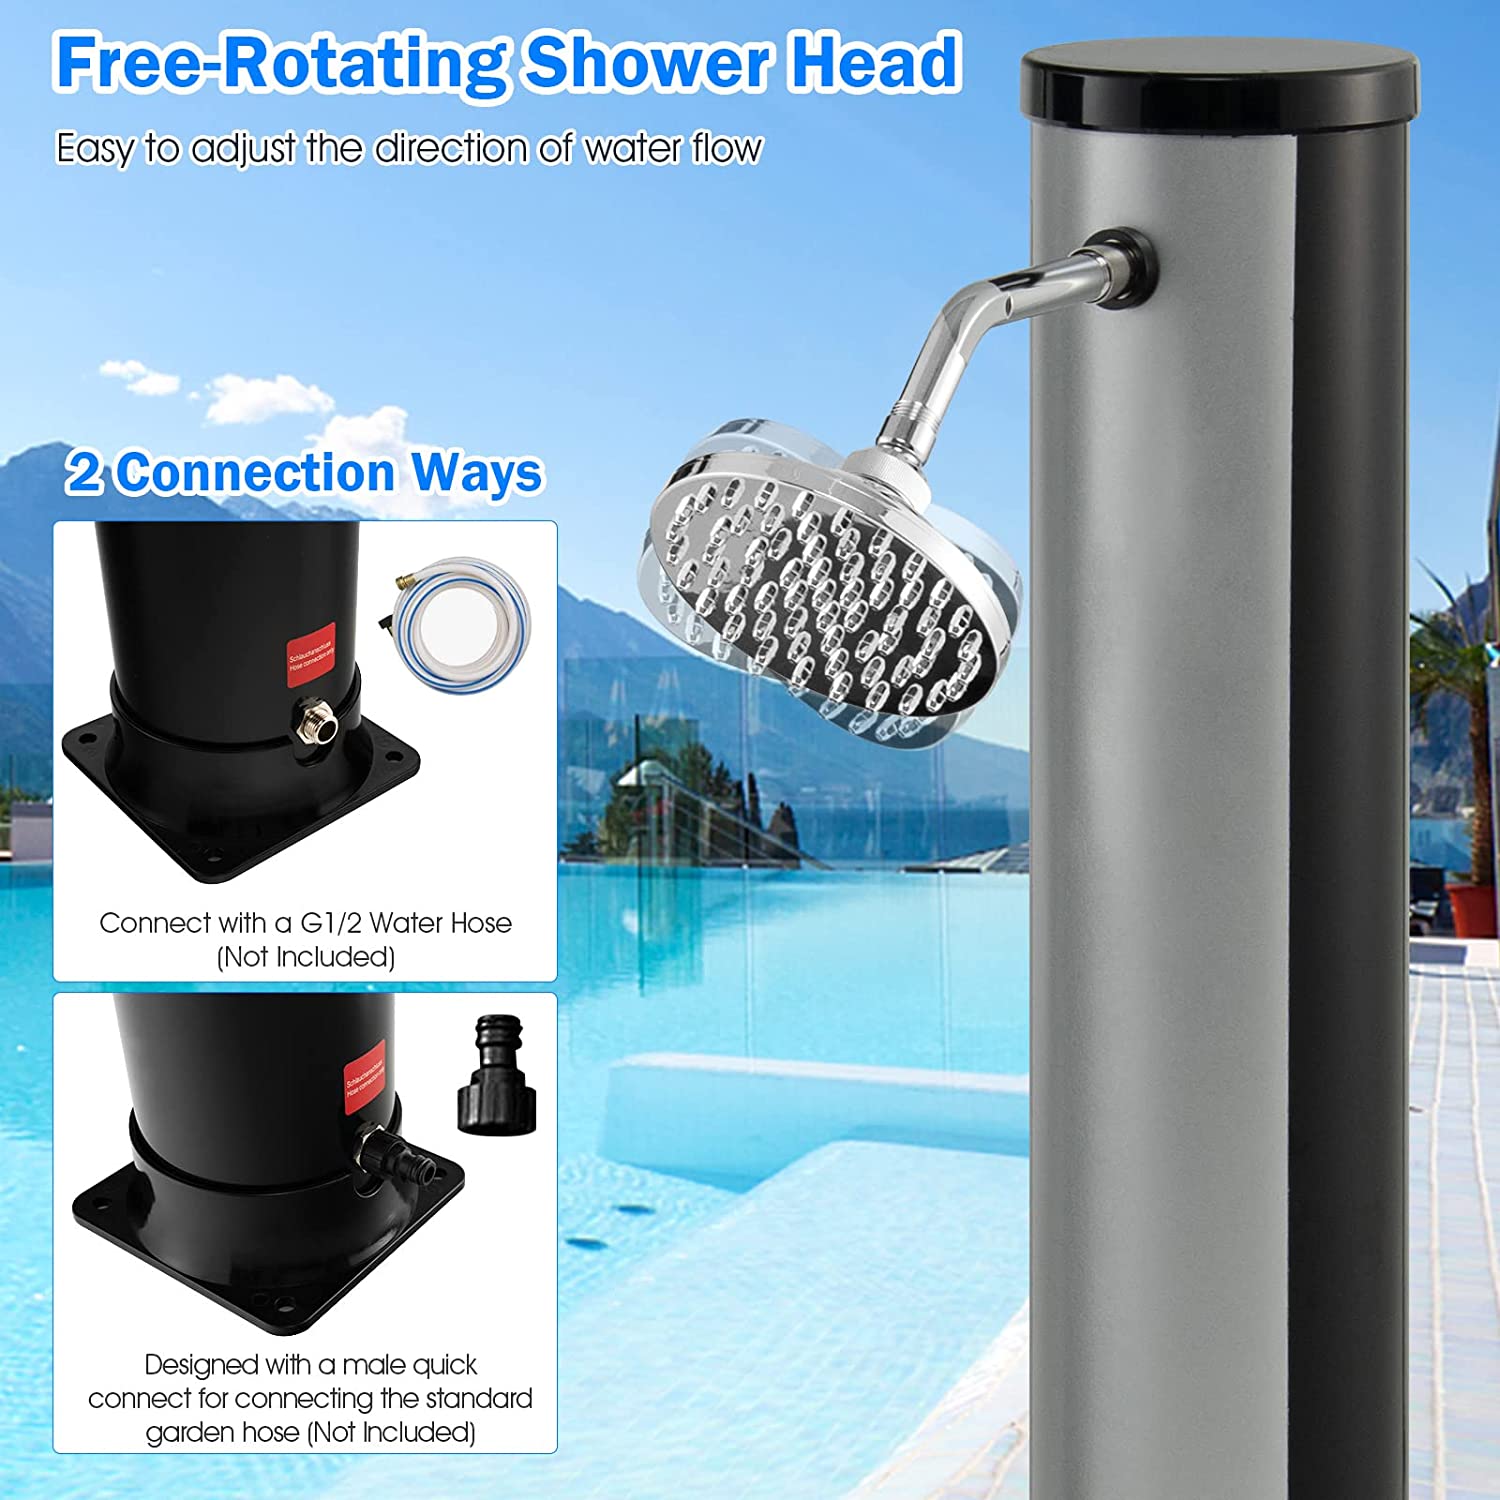 Chairliving 7.2FT Outdoor Solar-Heated Shower 10 Gallon 2-Section Pool Shower with Free-Rotating Shower Head Foot Tap Spigot